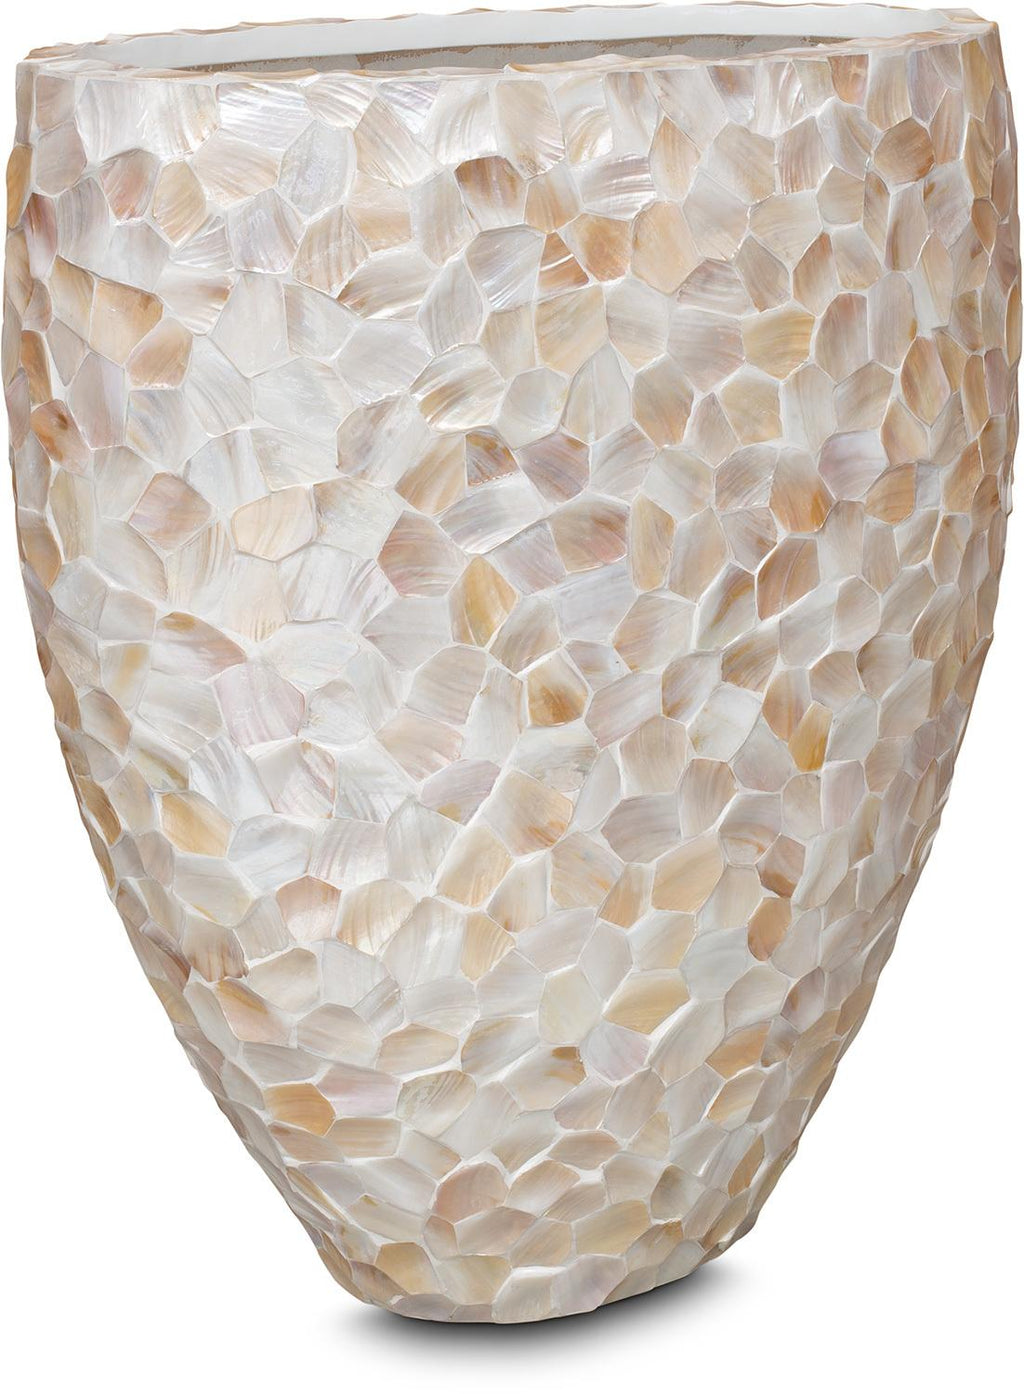 SHELL planter, 40/77 cm, brown mother of pearl